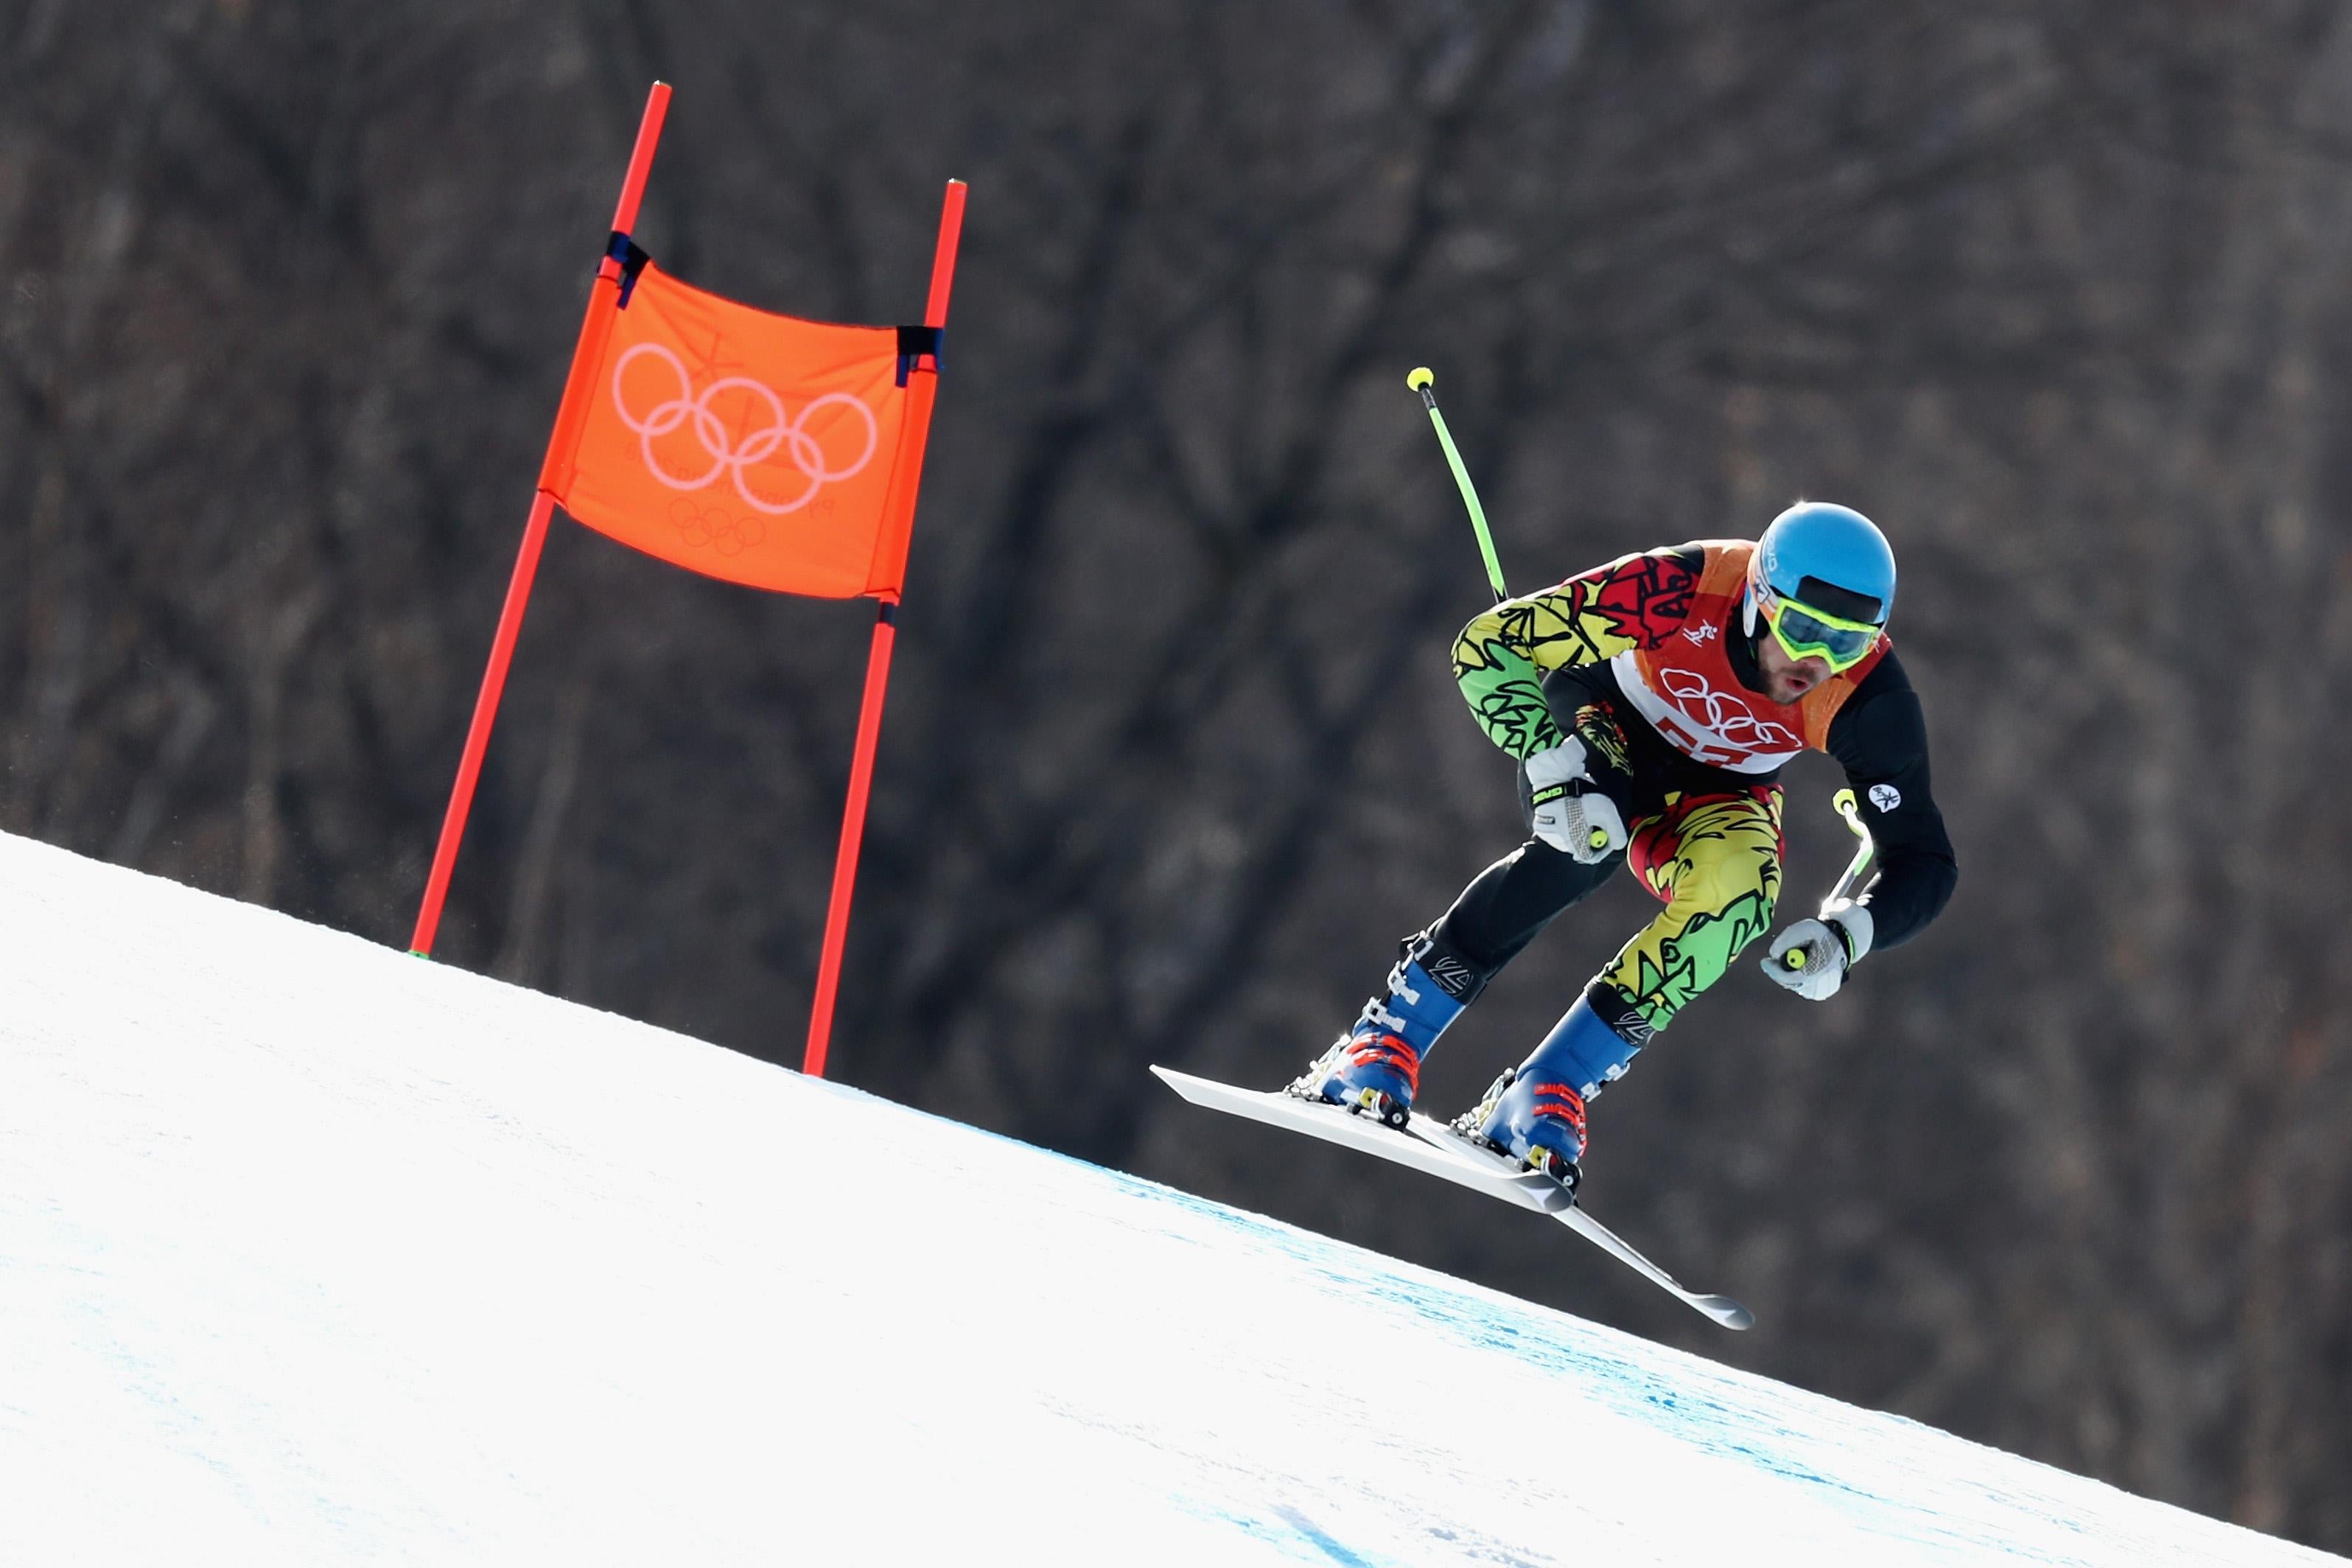 PYEONGCHANG-GUN, SOUTH KOREA - FEBRUARY 15:  Ivan Kovbasnyuk of Ukraine makes a run during the Men's Downhill on day six of the PyeongChang 2018 Winter Olympic Games at Jeongseon Alpine Centre on February 15, 2018 in Pyeongchang-gun, South Korea.  (Photo by Al Bello/Getty Images)